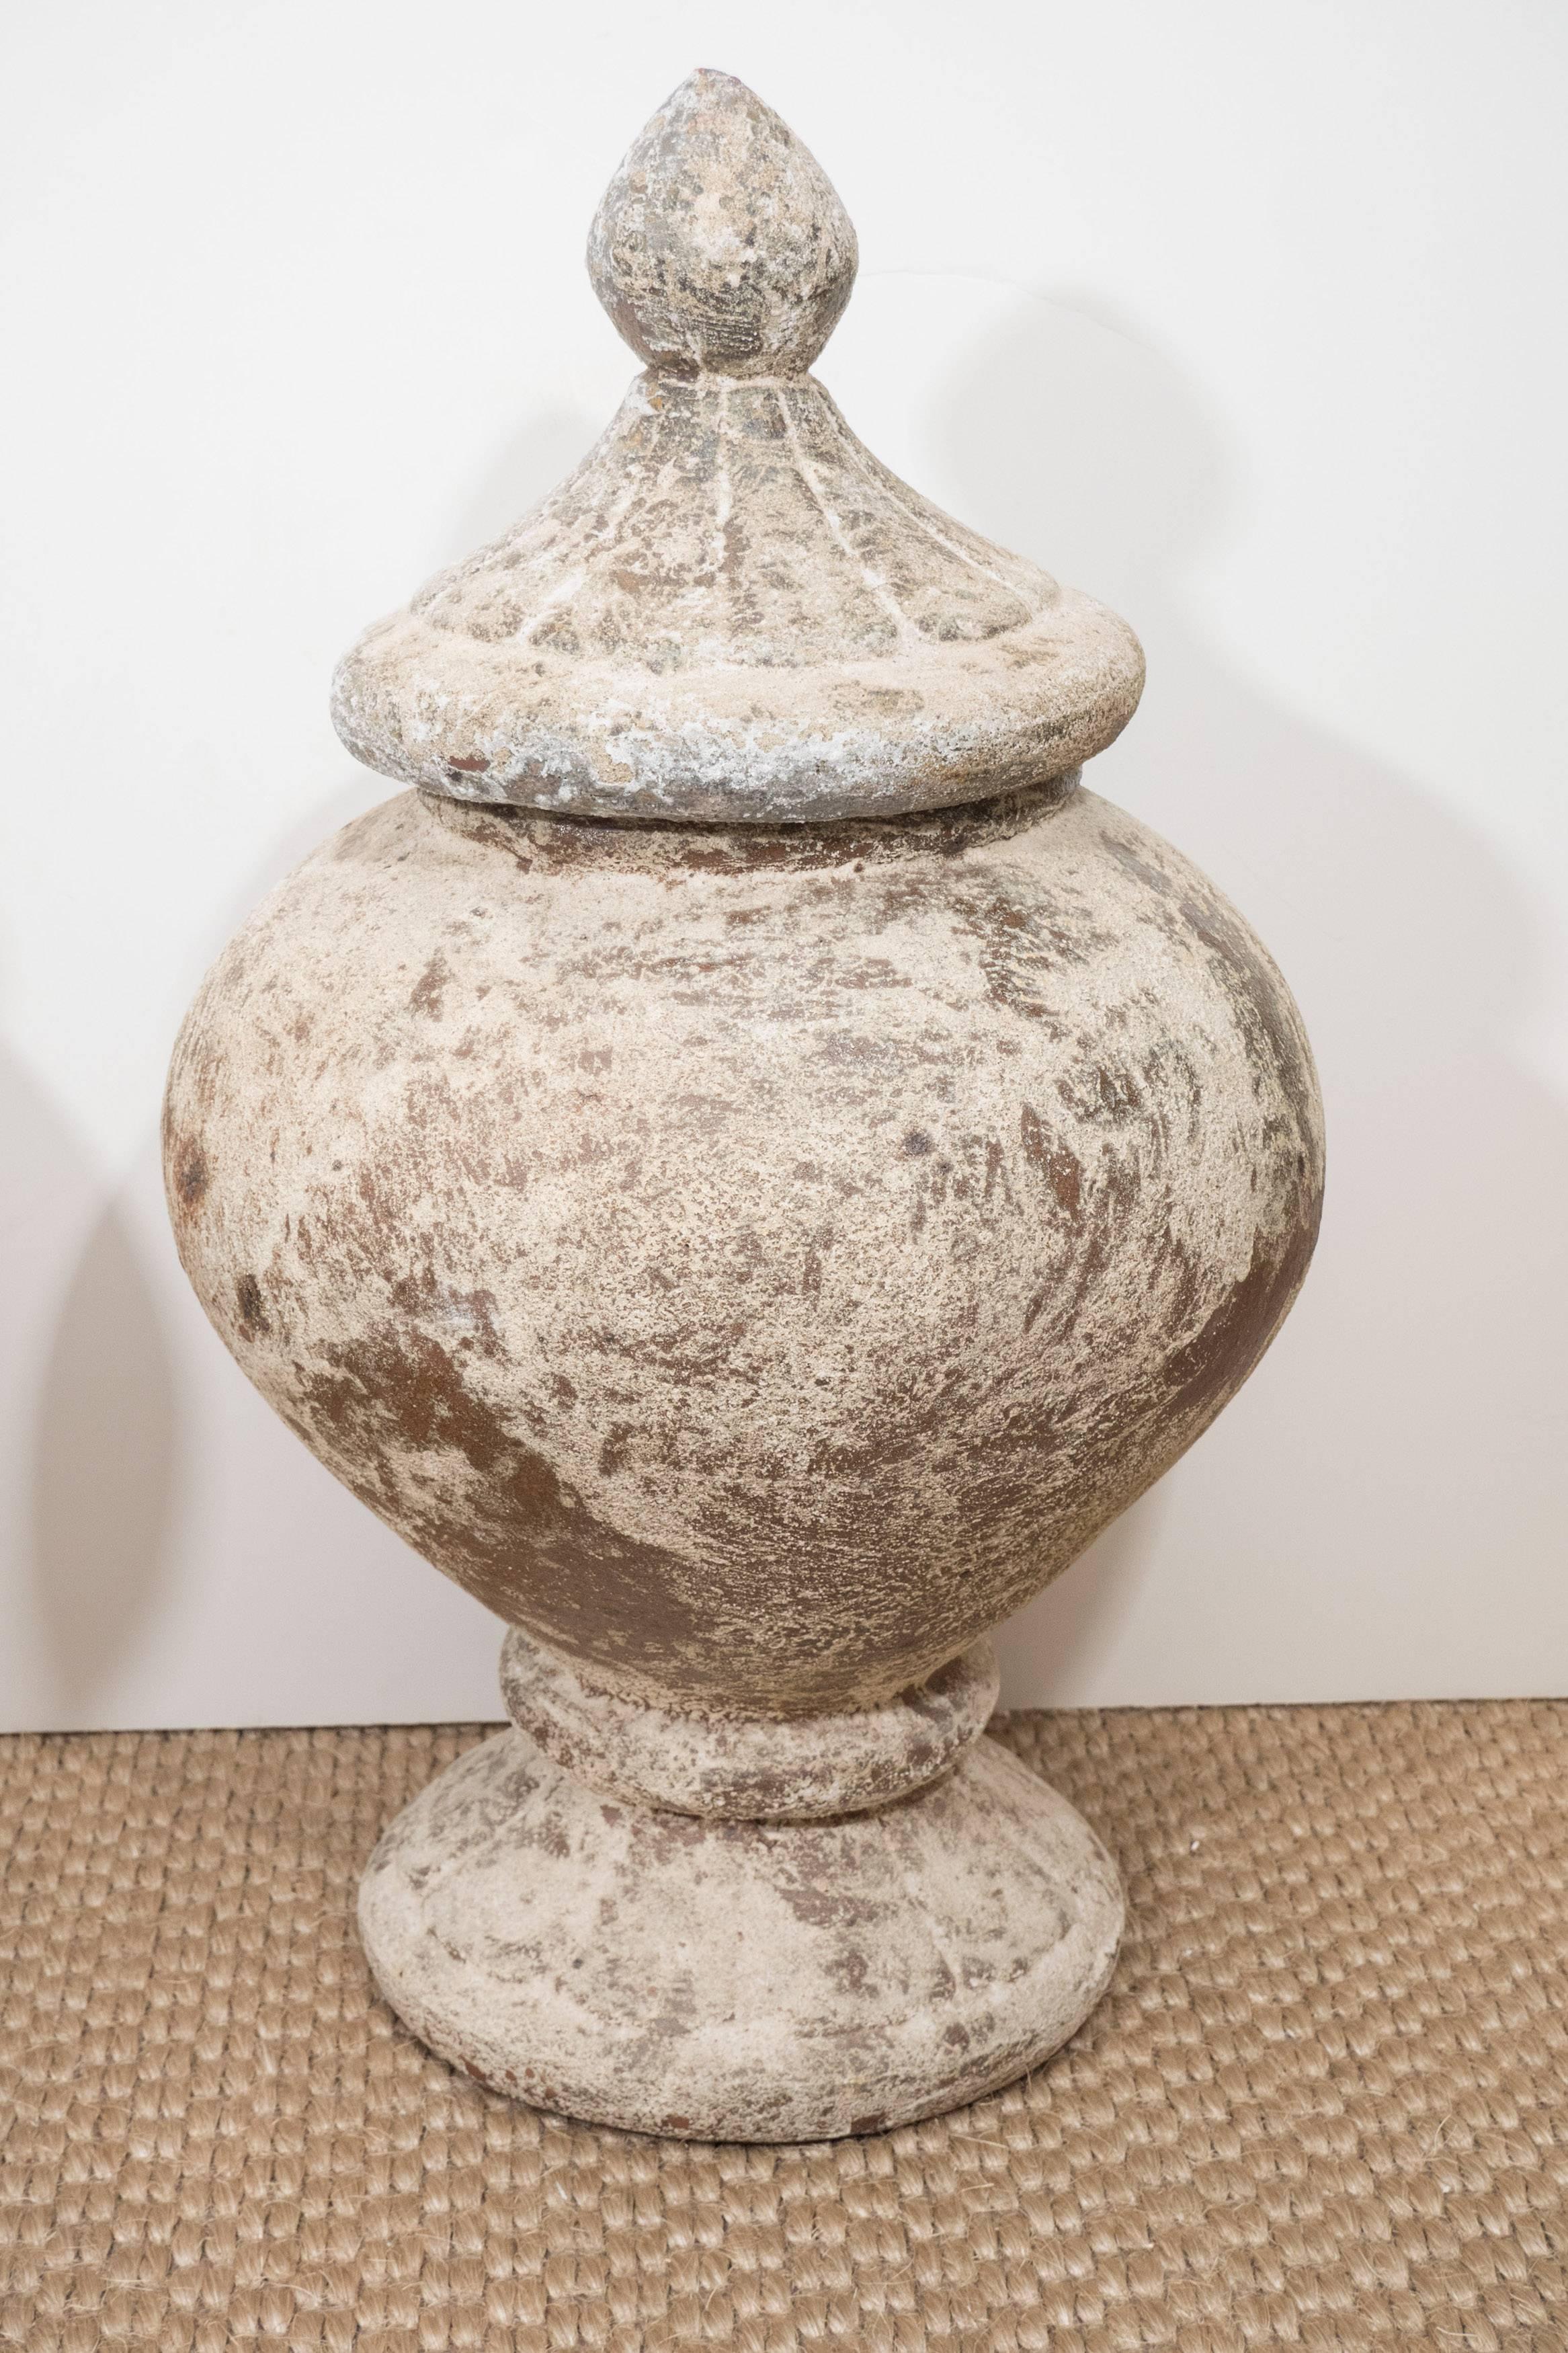 These cement urns with lids have so much character. We love blending rustic and refined. These can go in the garden or among fine antiques.